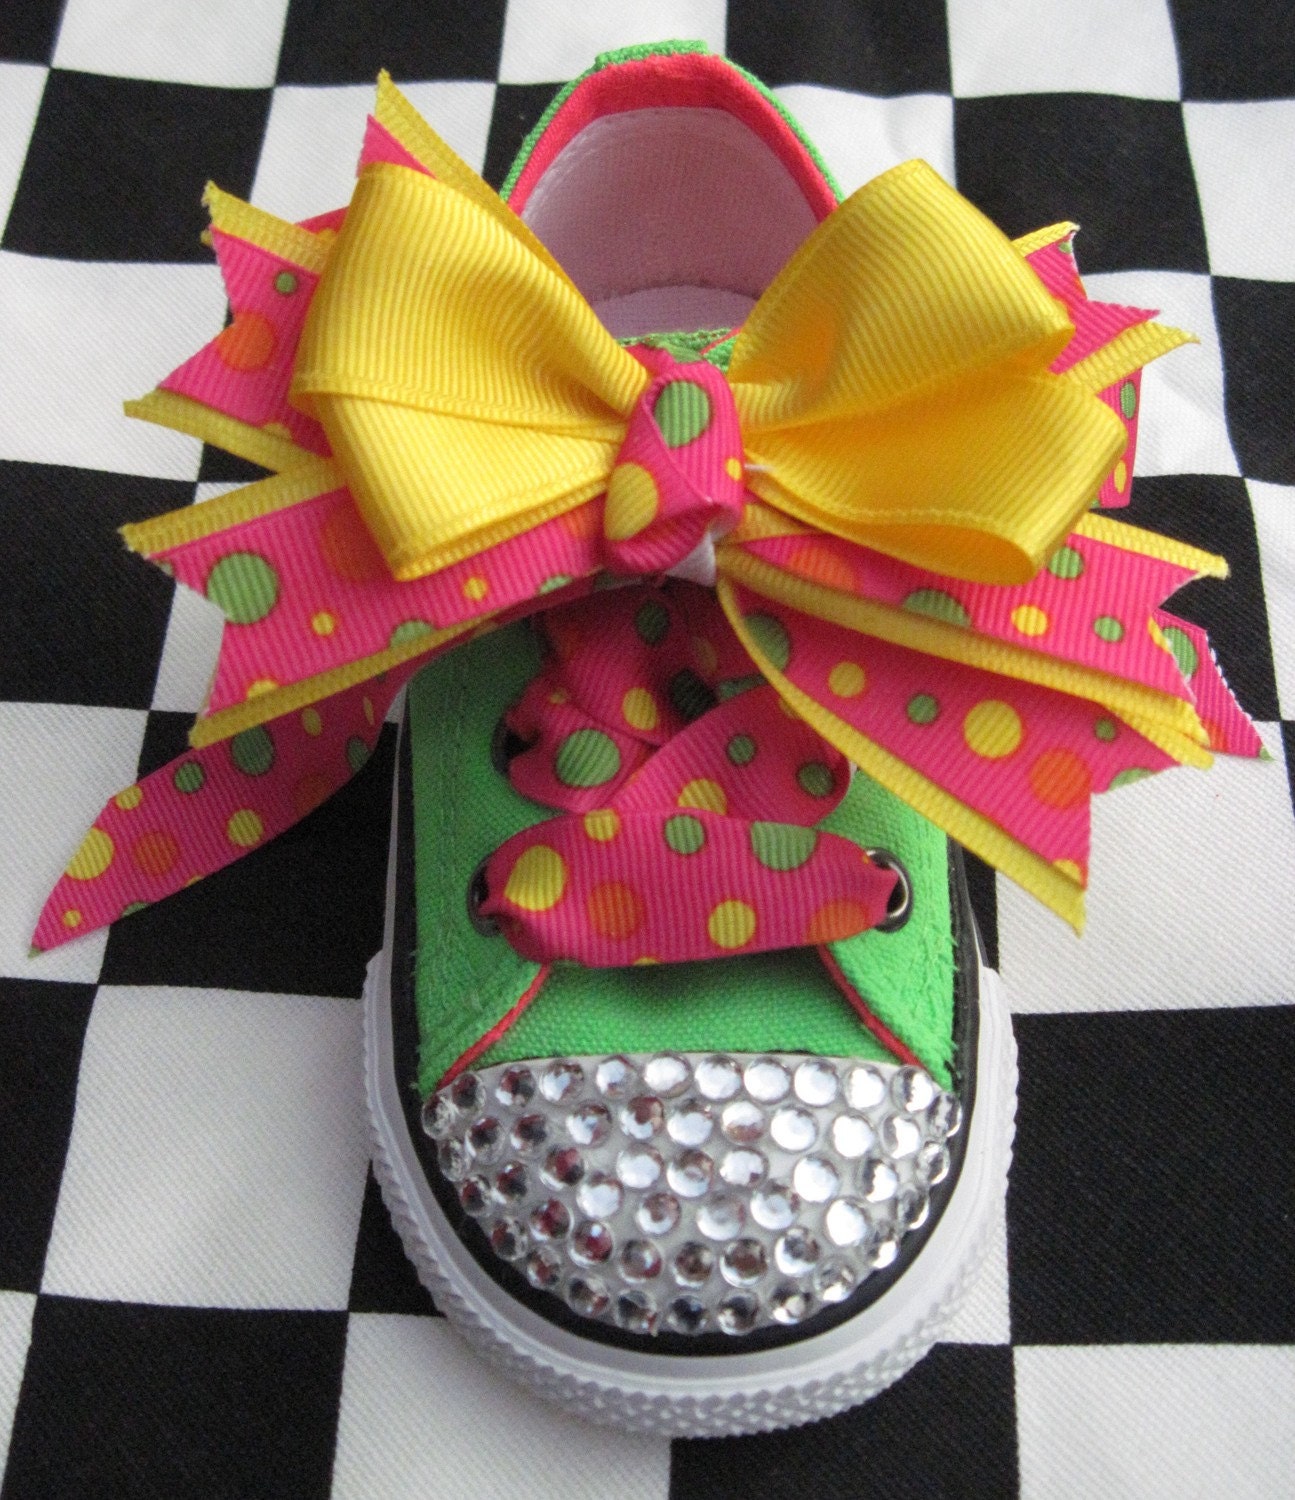 Bling - Rhinestone Studded Neon Green/Hot Pink Converse Low Top Shoes with Bow Clips